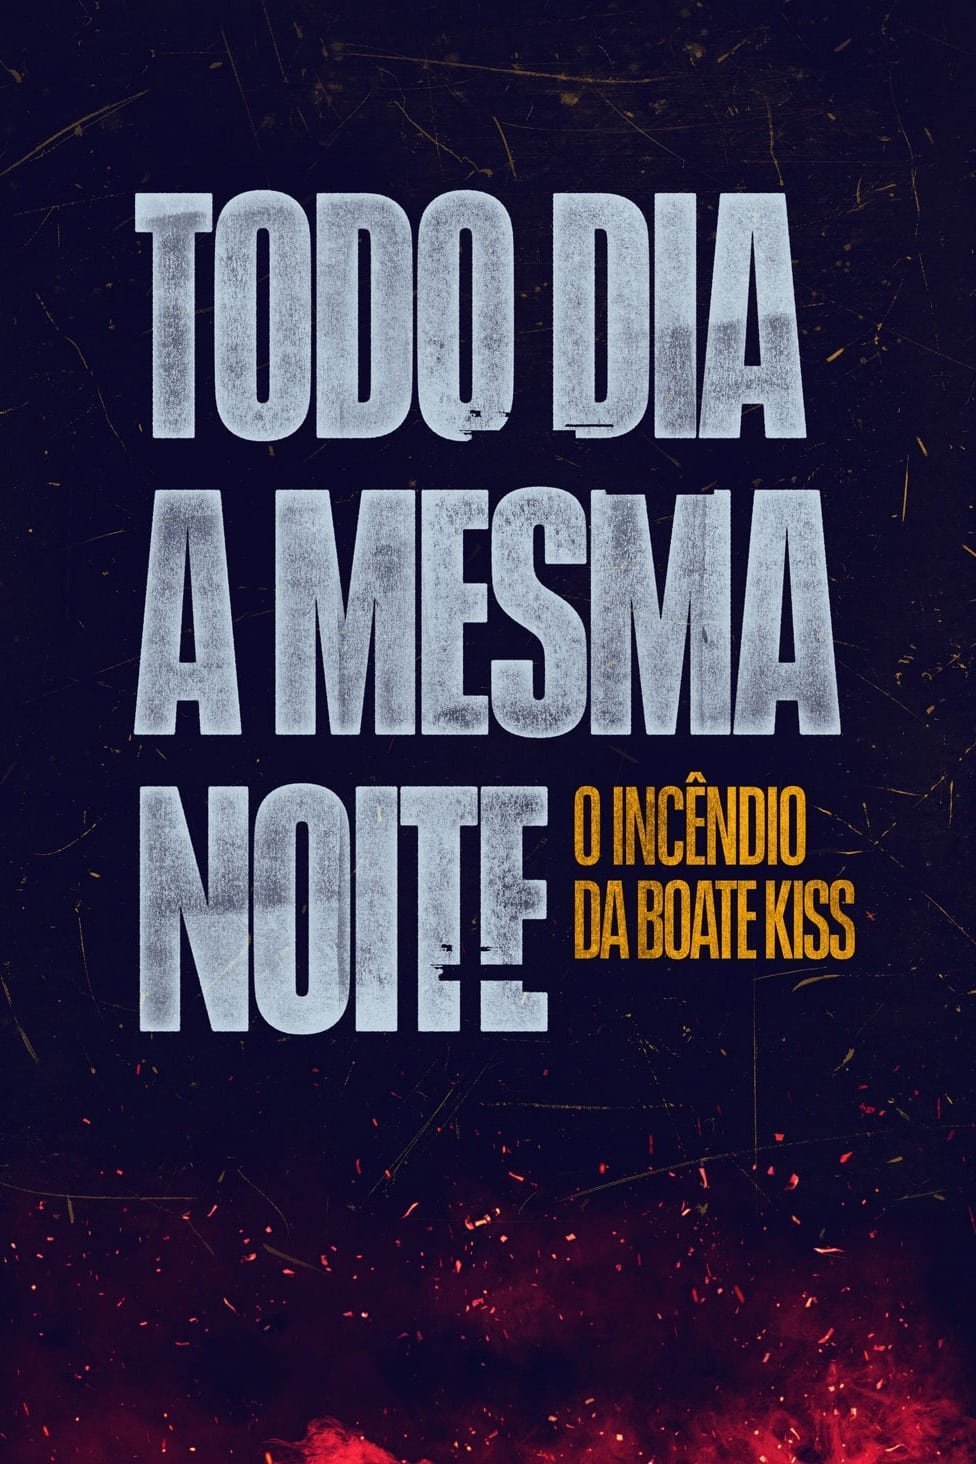 Portuguese poster of the movie The Endless Night